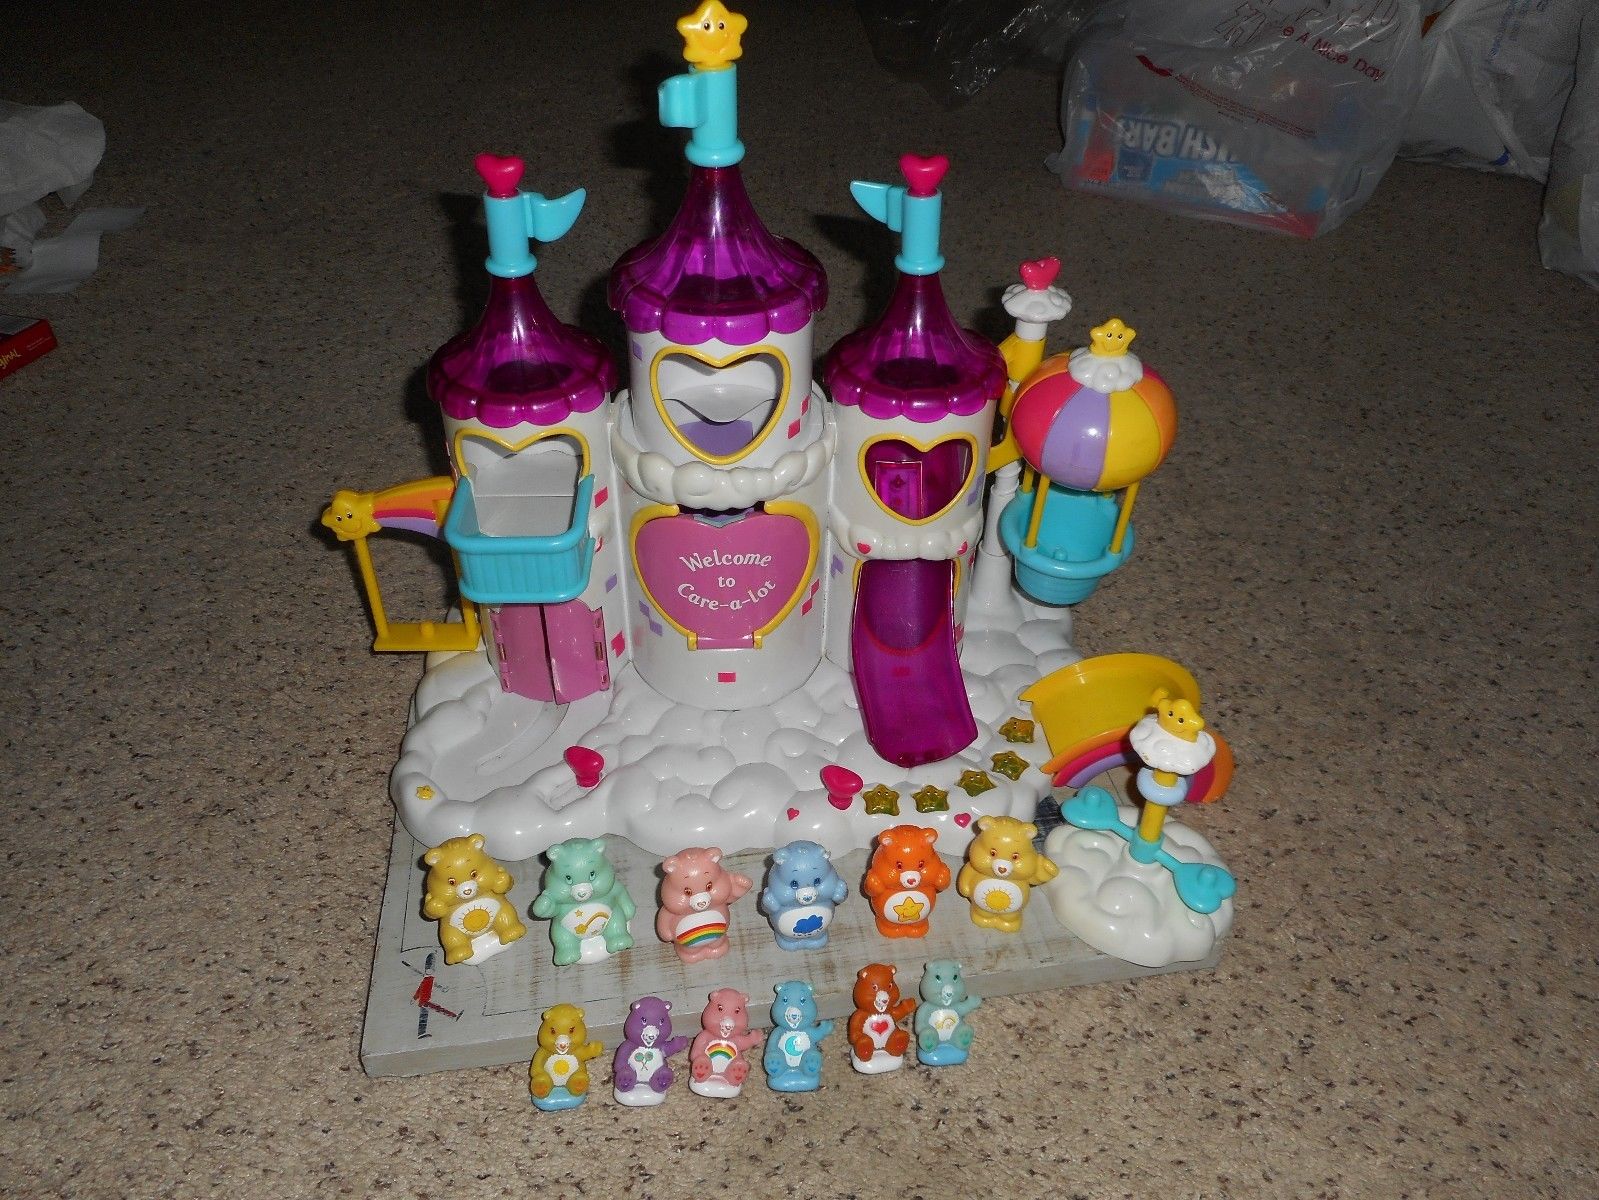 Care Bears Magical Cloud Castle Playset, with 12 Bears, nice condition